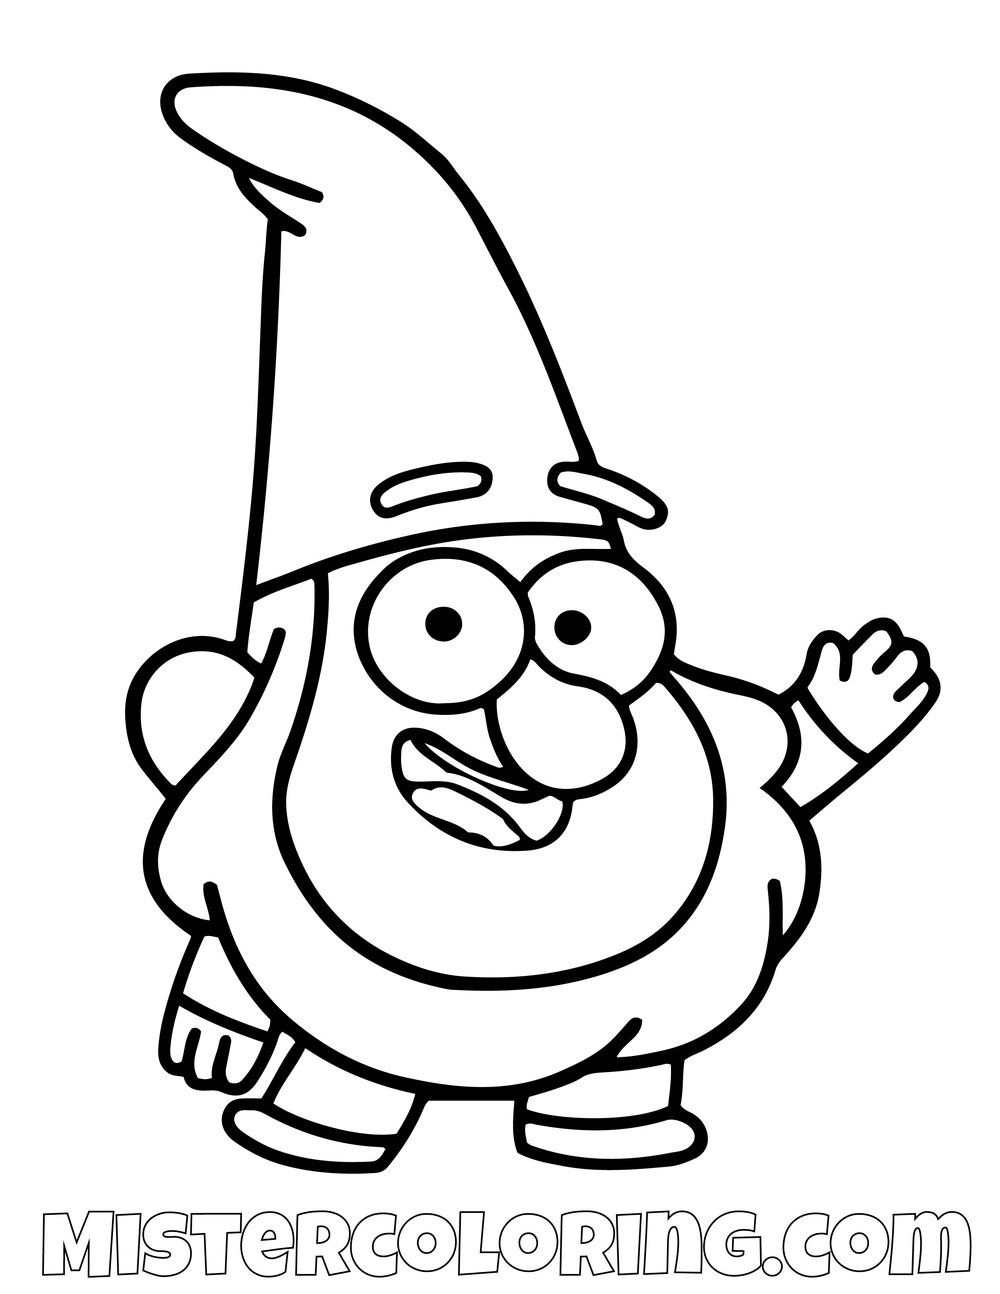 Gnome Gravity Falls Coloring Pages For Kids | Gravity falls ...